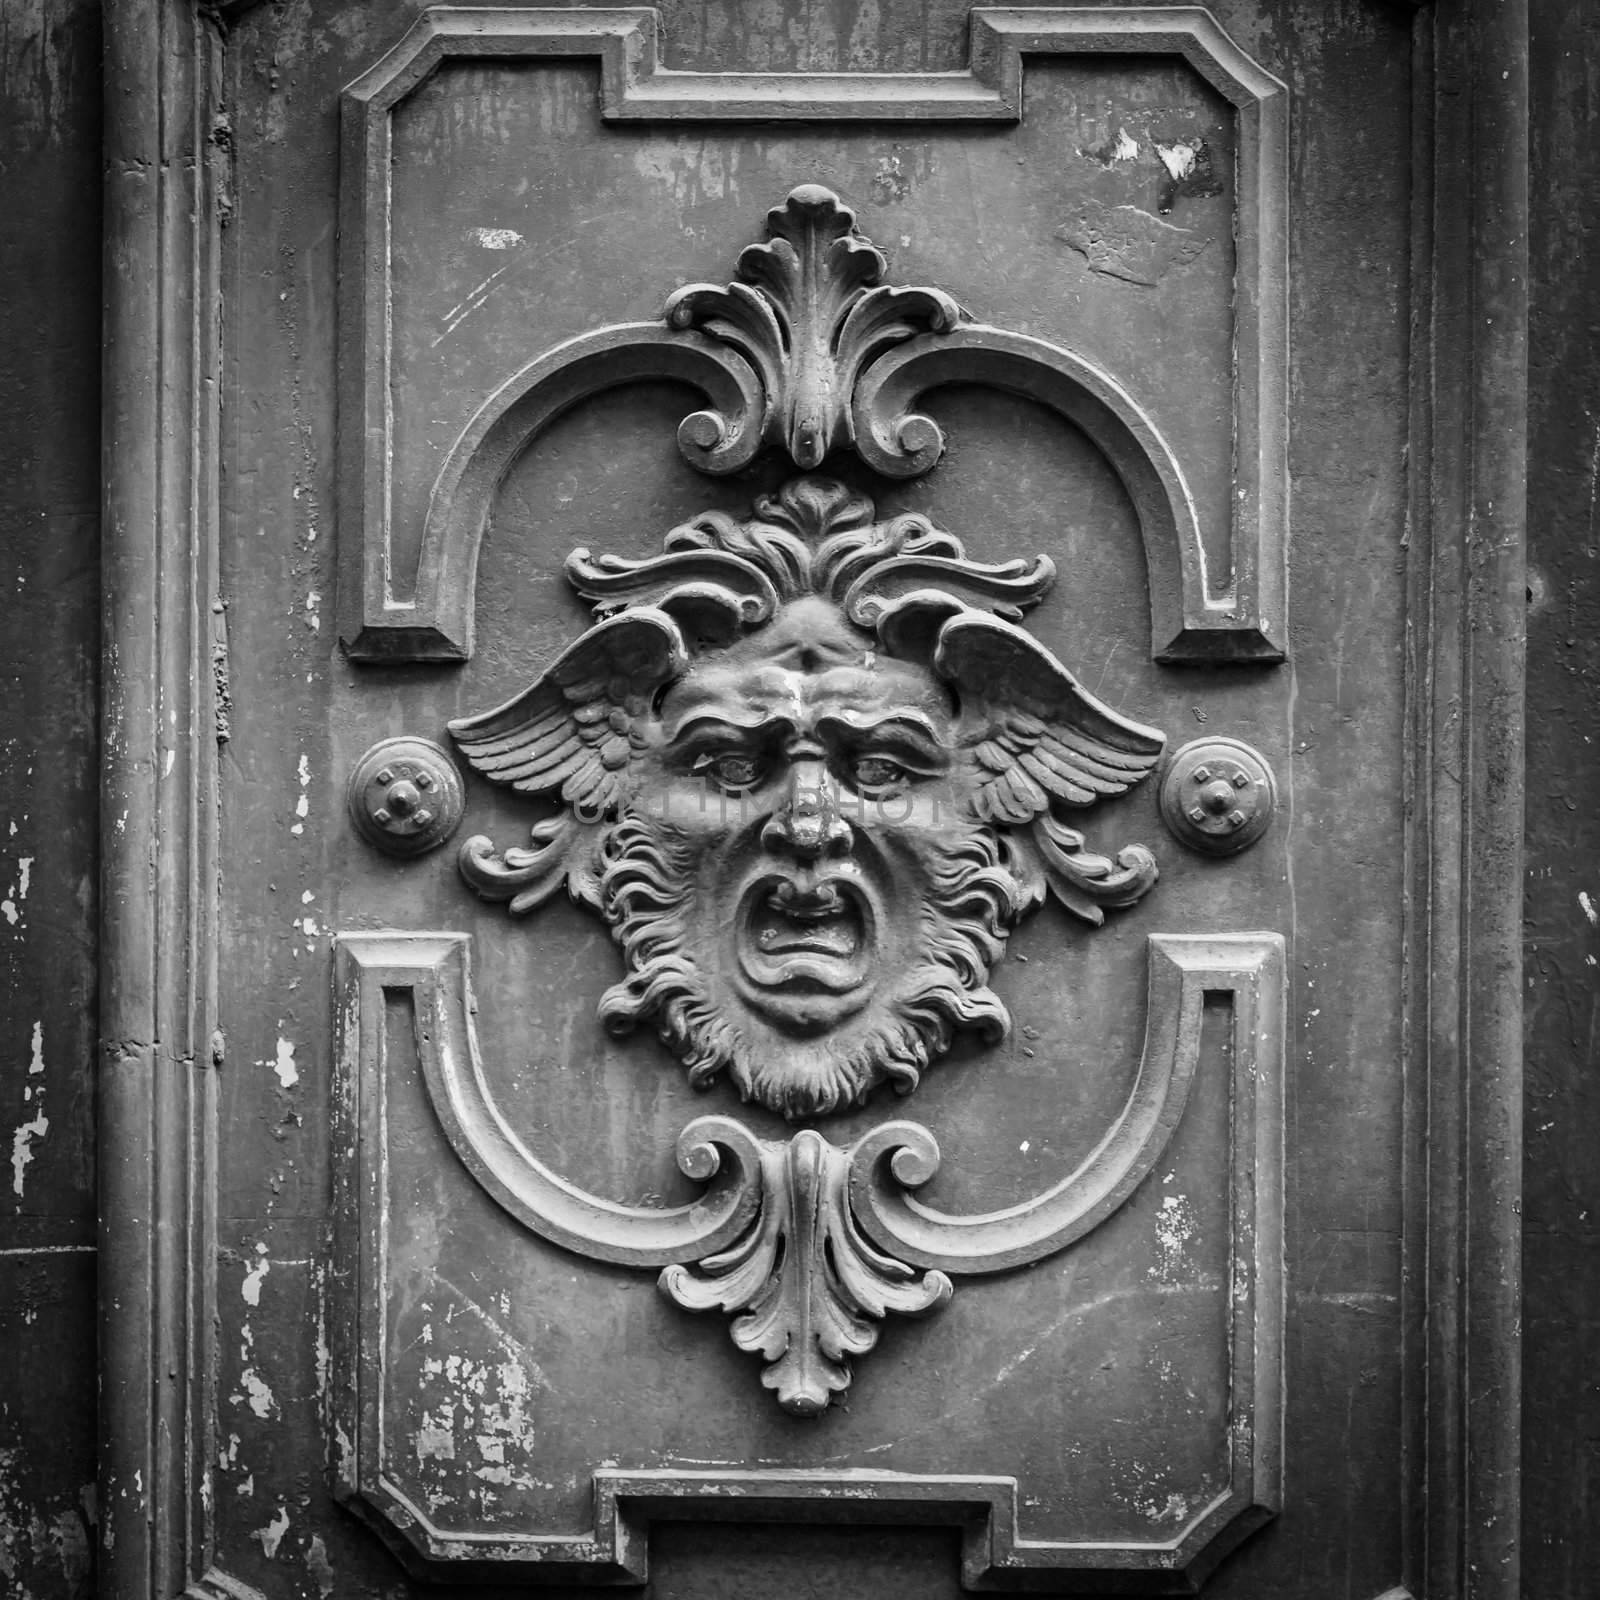 Gothic mask on an old wodden door in Milan - Italy